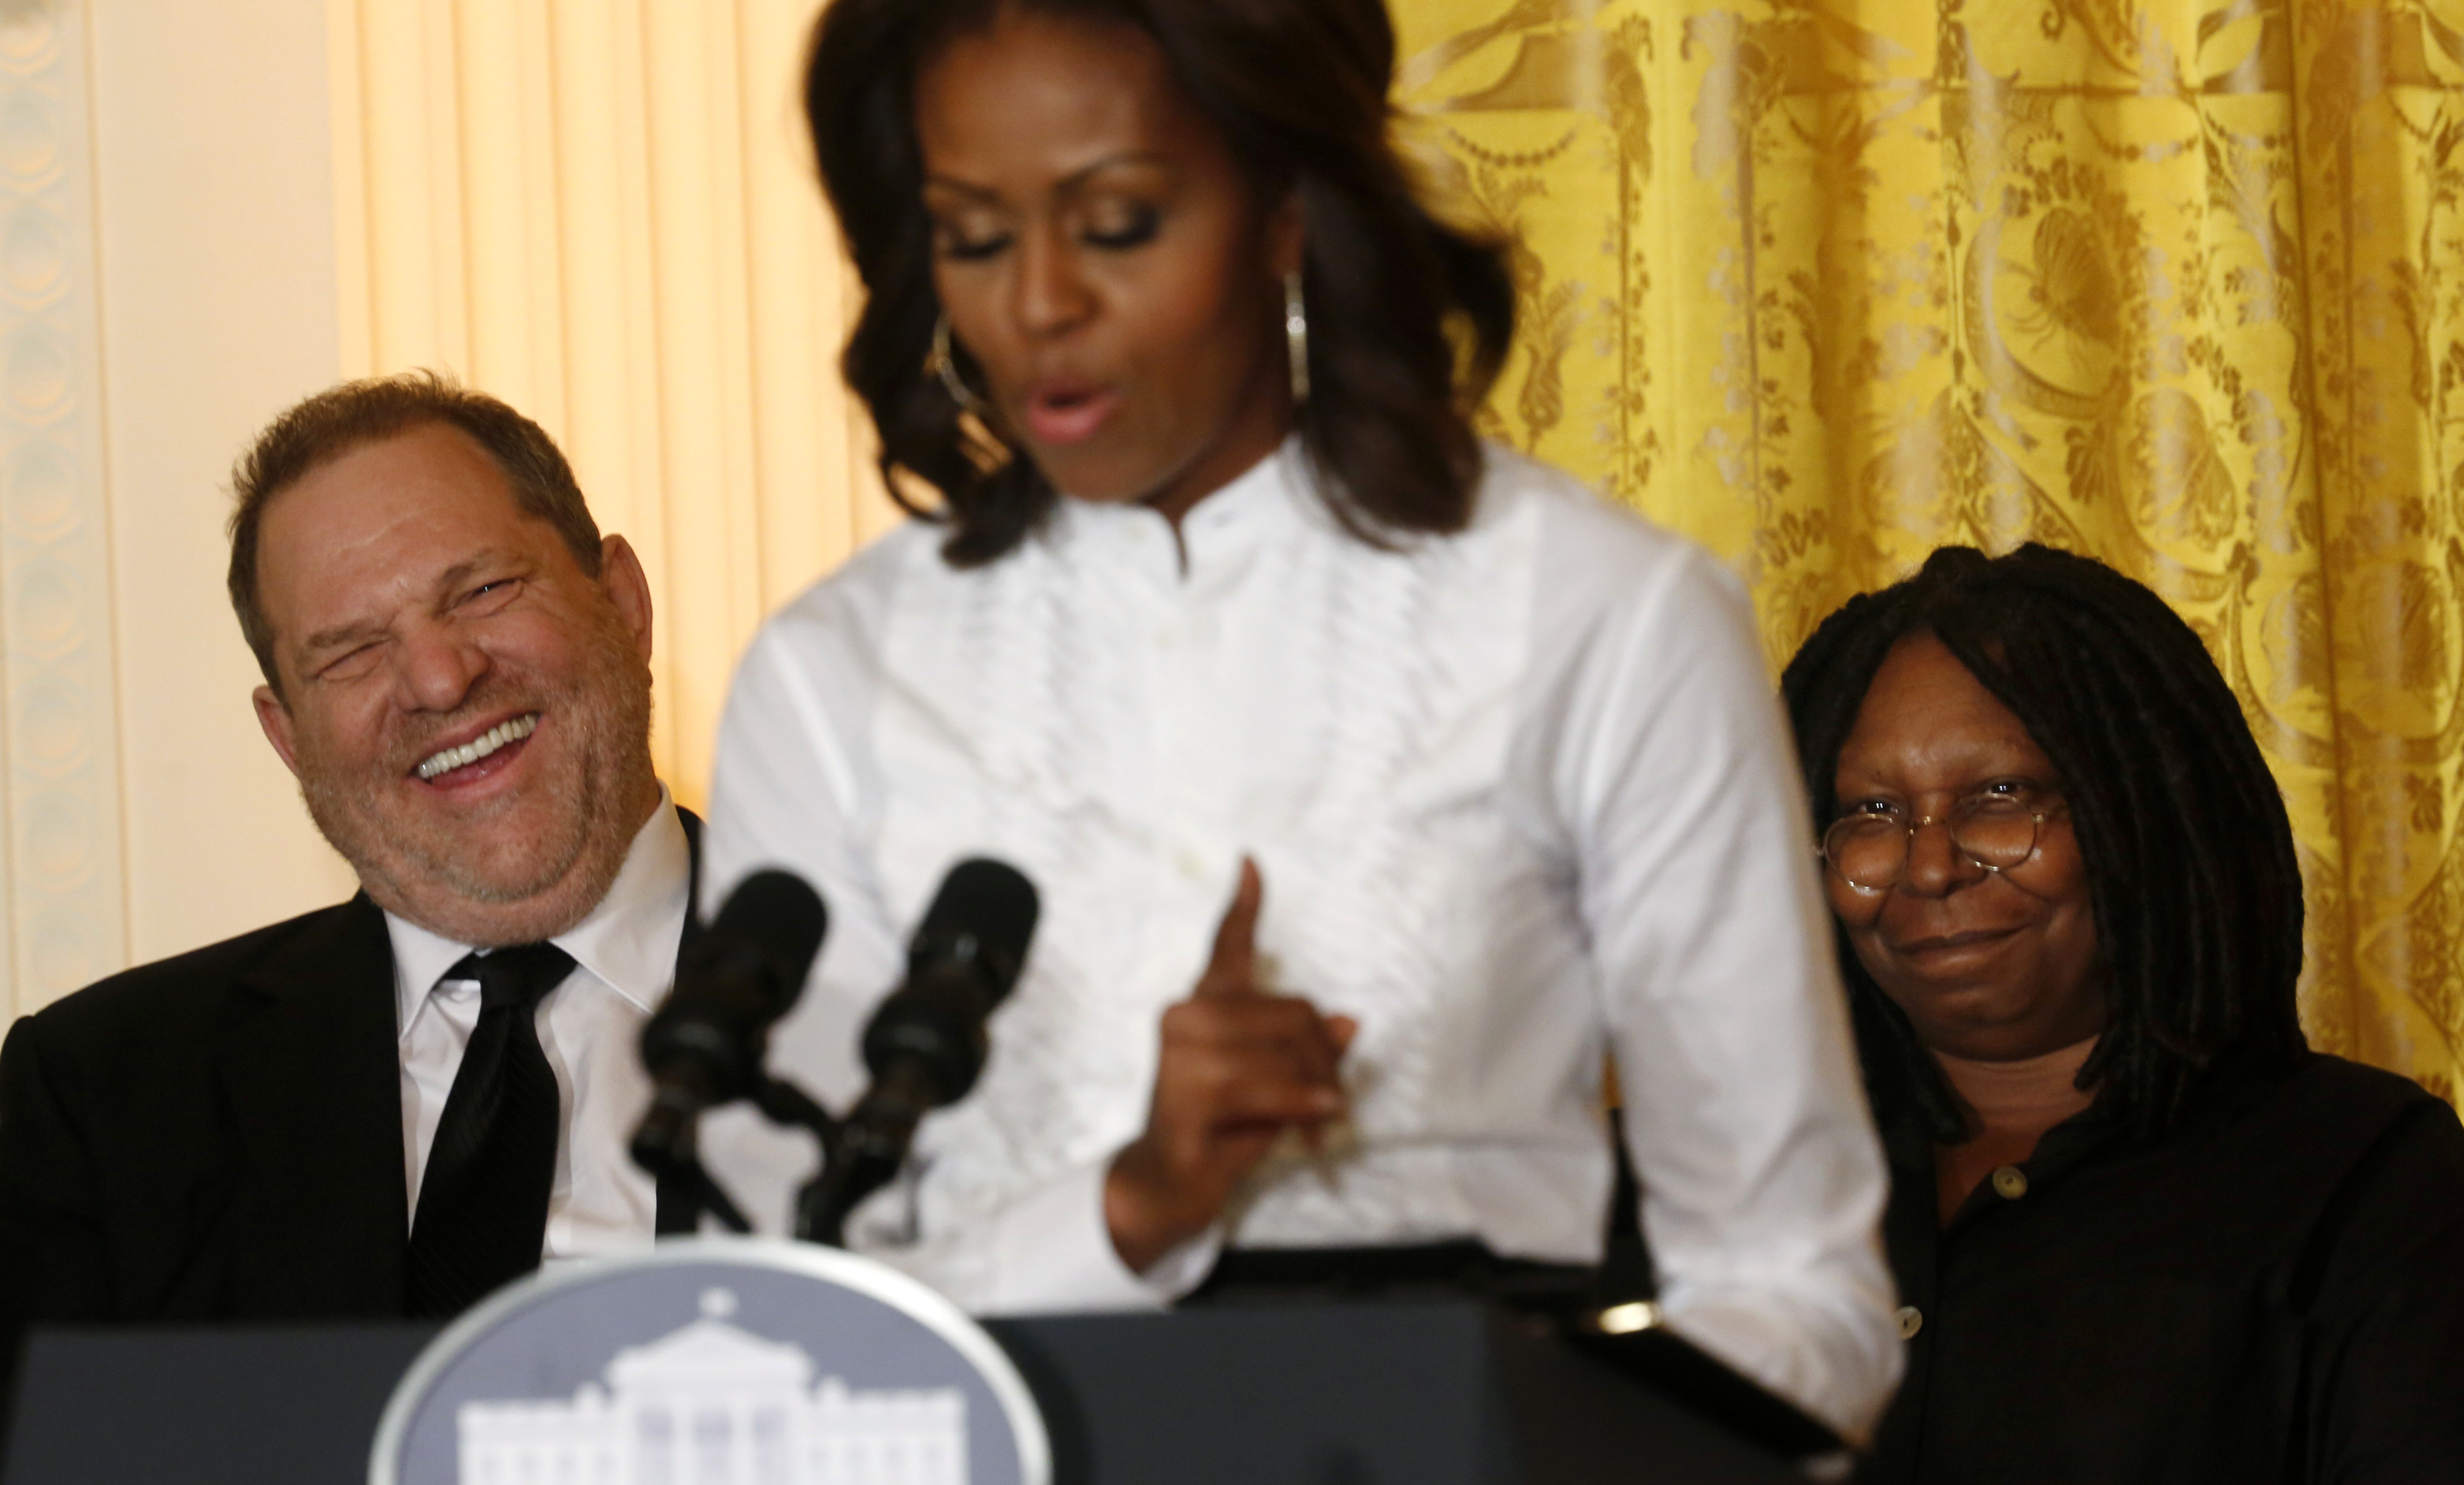 Film producer and studio executive Harvey Weinstein laughs at remarks directed at him by first lady Michelle Obama as she hosts a workshop at the White House for high school students about careers in film in Washington on Nov. 8, 2013. (Kevin Lamarque—Reuters)